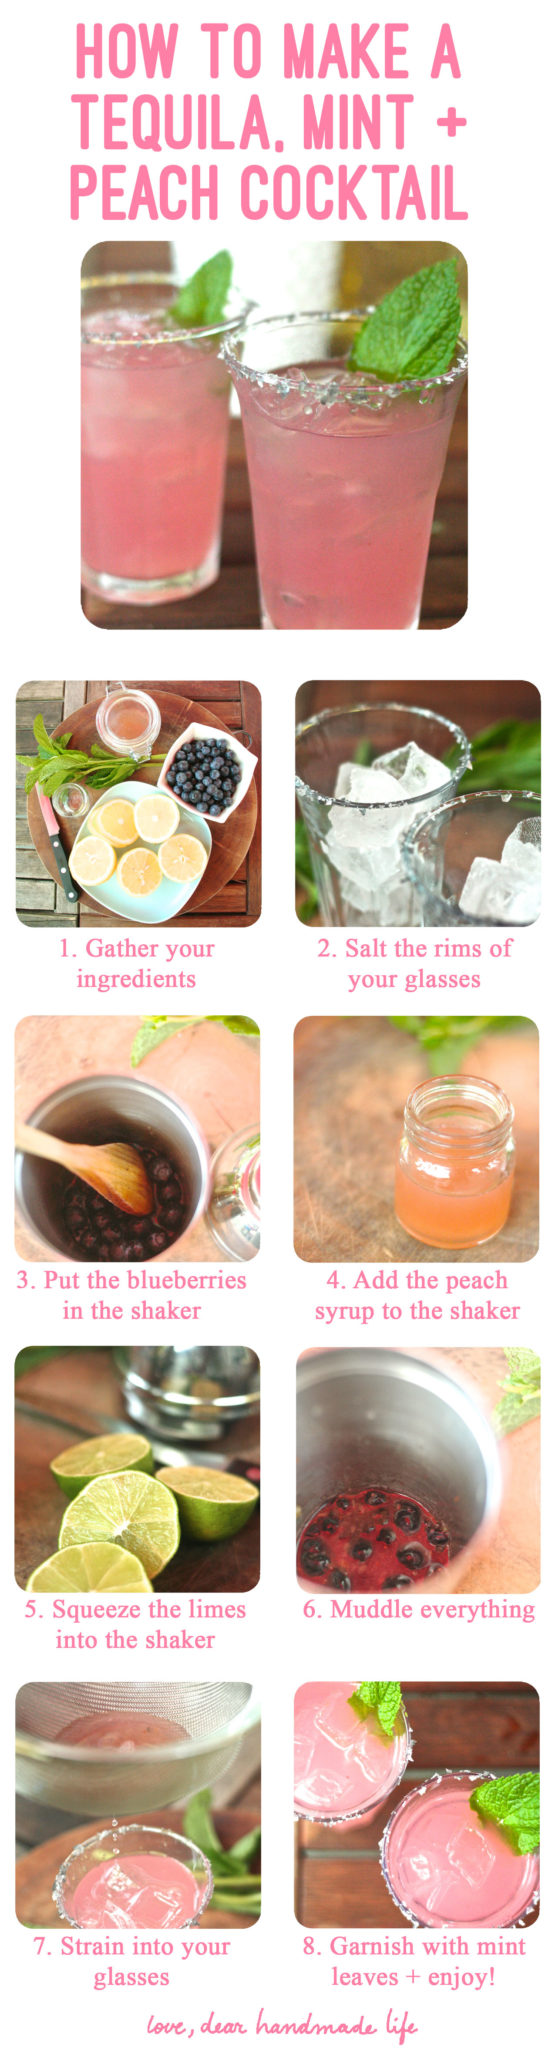 1-recipe-how-to-make-tequila-mint-peach-cocktail-dear-handmade-life